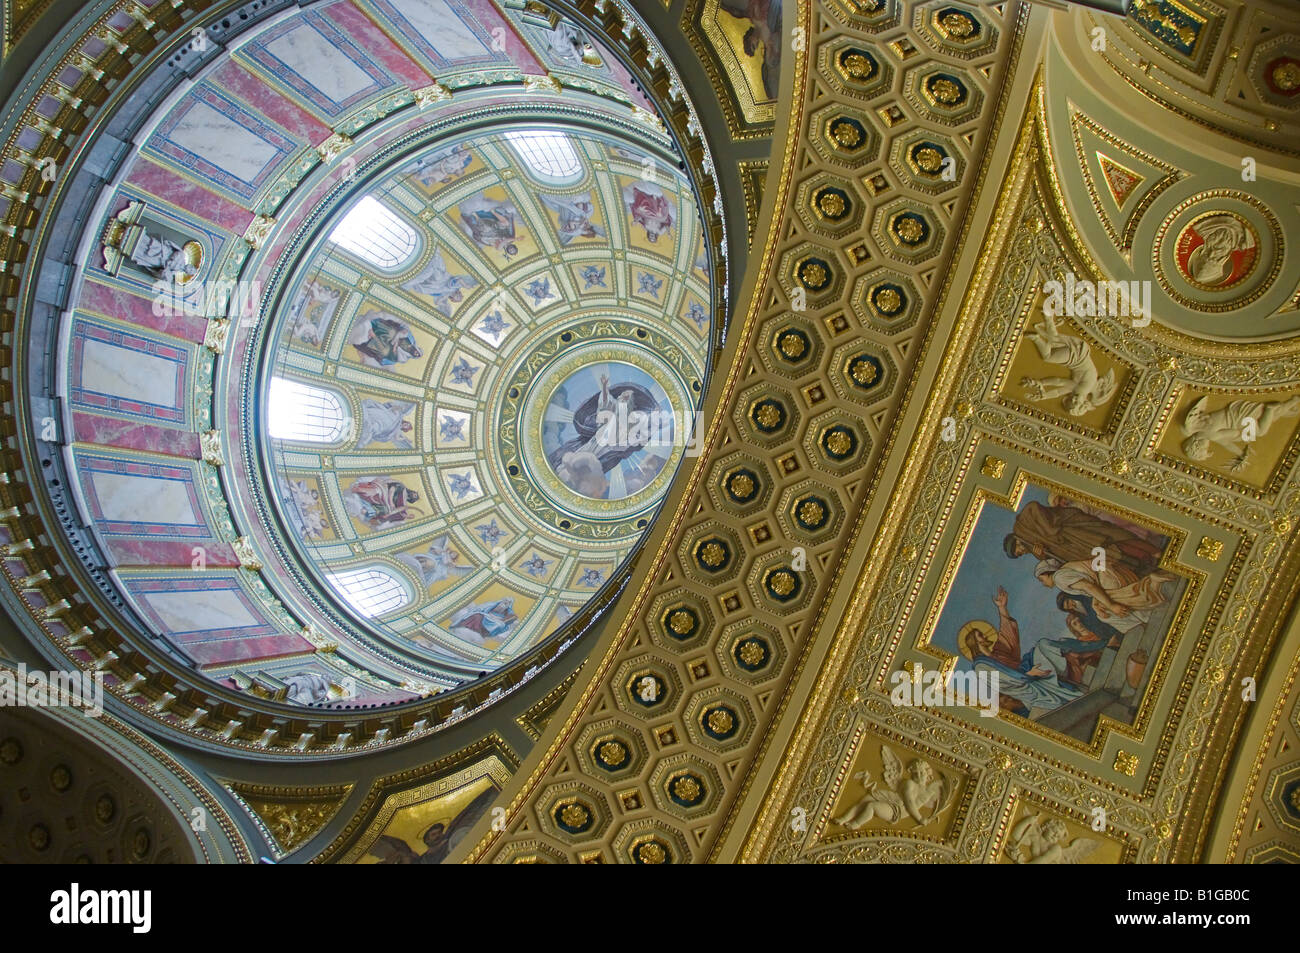 Budapest, Hungary. St Stephen's Cathedral. Interior - detail of the ceiling / dome Stock Photo